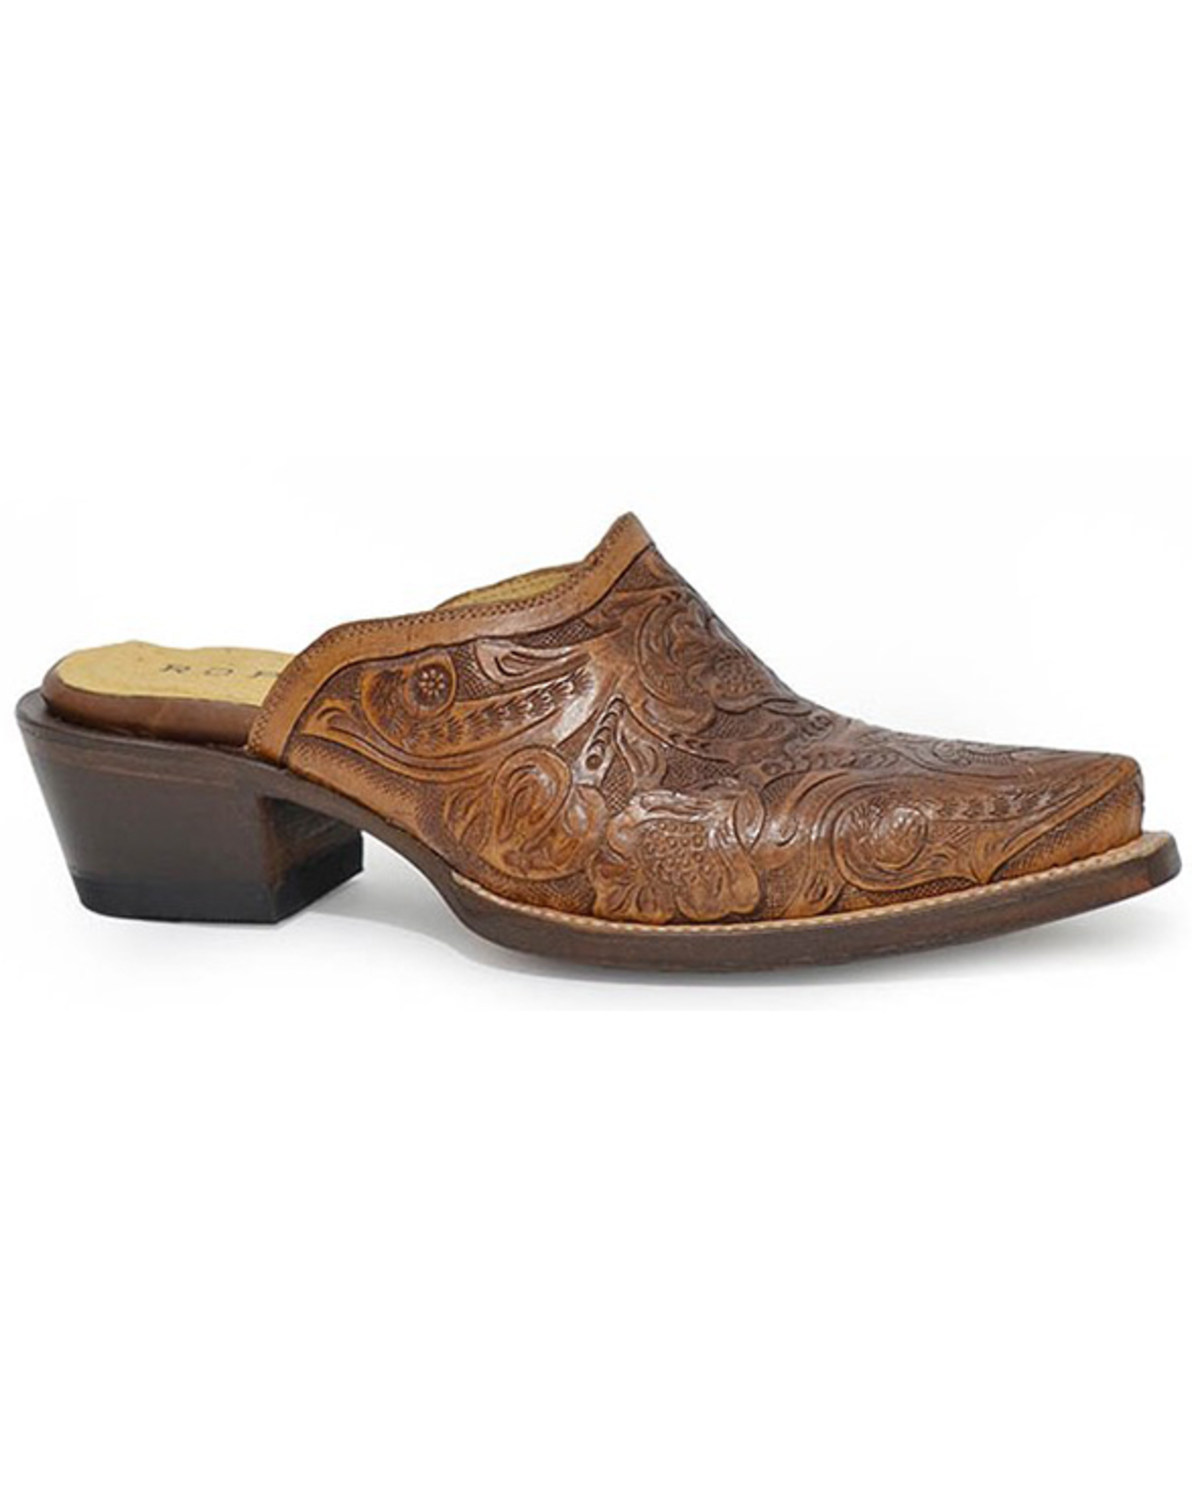 Roper Women's Mary Handtooled Embroidered Mules - Snip Toe